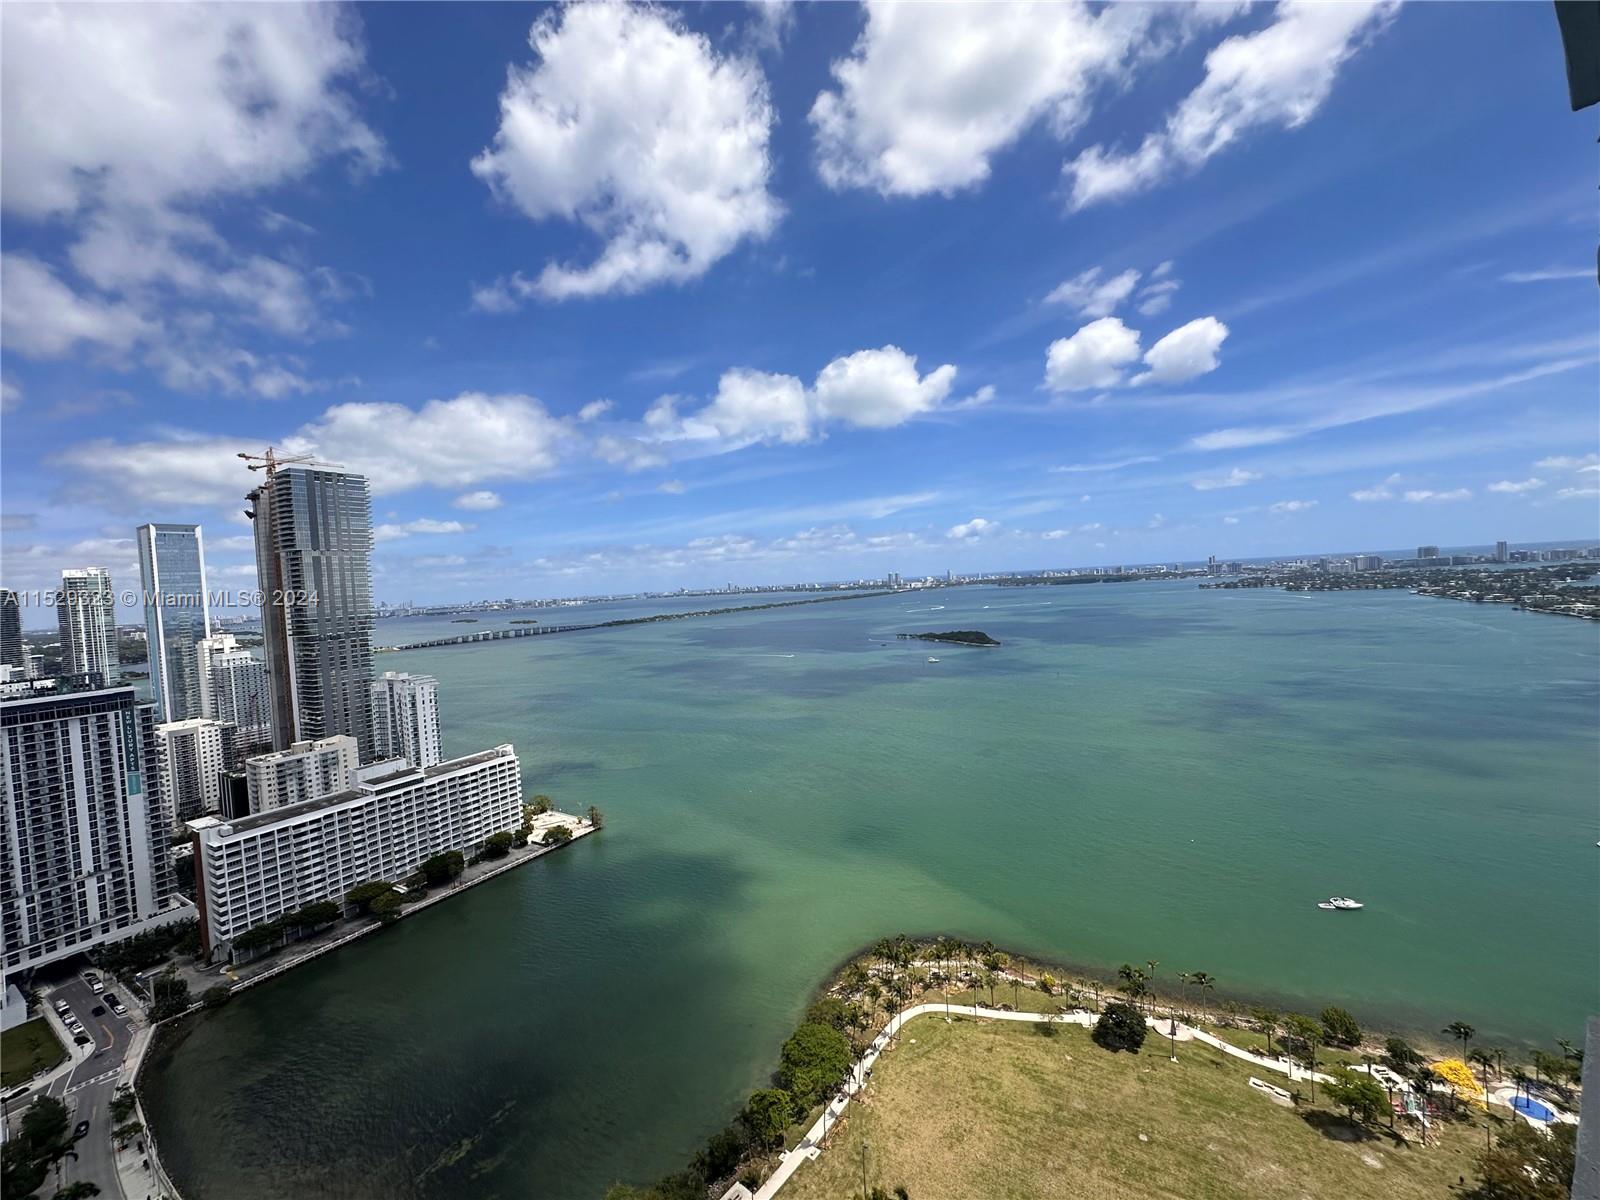 3 BED/ 3 BATH WITH INCREDIBLE VIEWS OF BISCAYNE BAY AND THE MIAMI SKYLINE IN THE HEART OF EDGEWATER FOR RENT. Spacious living/dining room with eat-in kitchen with natural light throughout and water views from every angle. Bedrooms are spacious with access to private balconies. Vacant and easy to show!